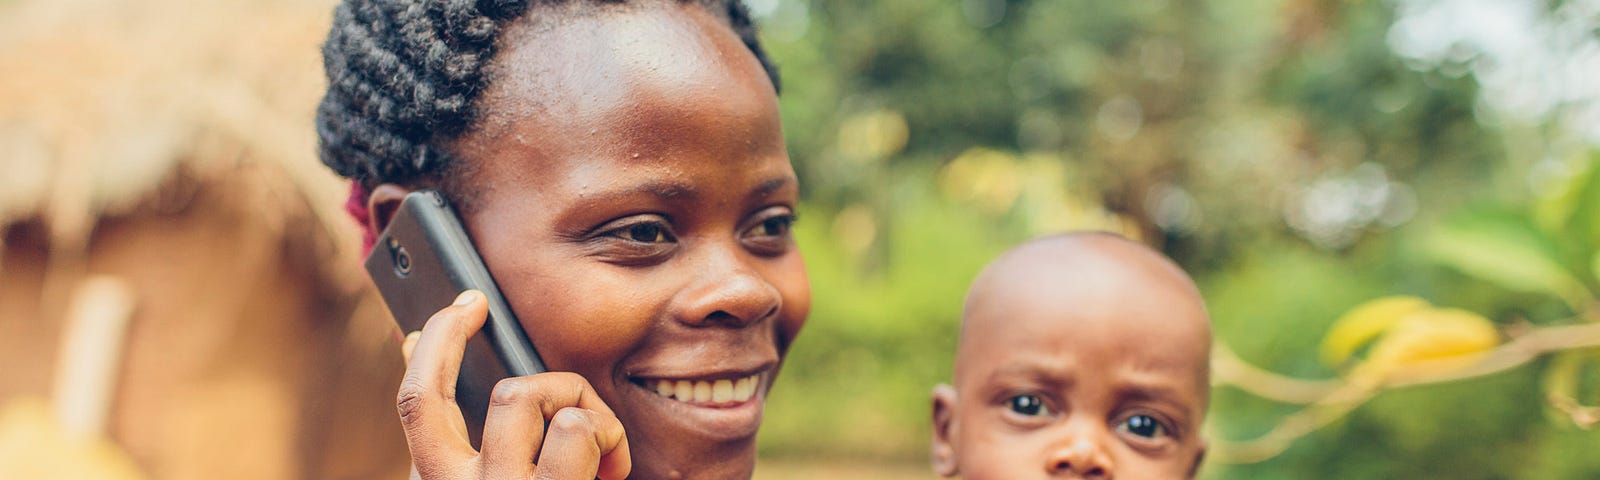 A smiling woman holds a mobile phone to her ear while also holding a small child in her other arm.